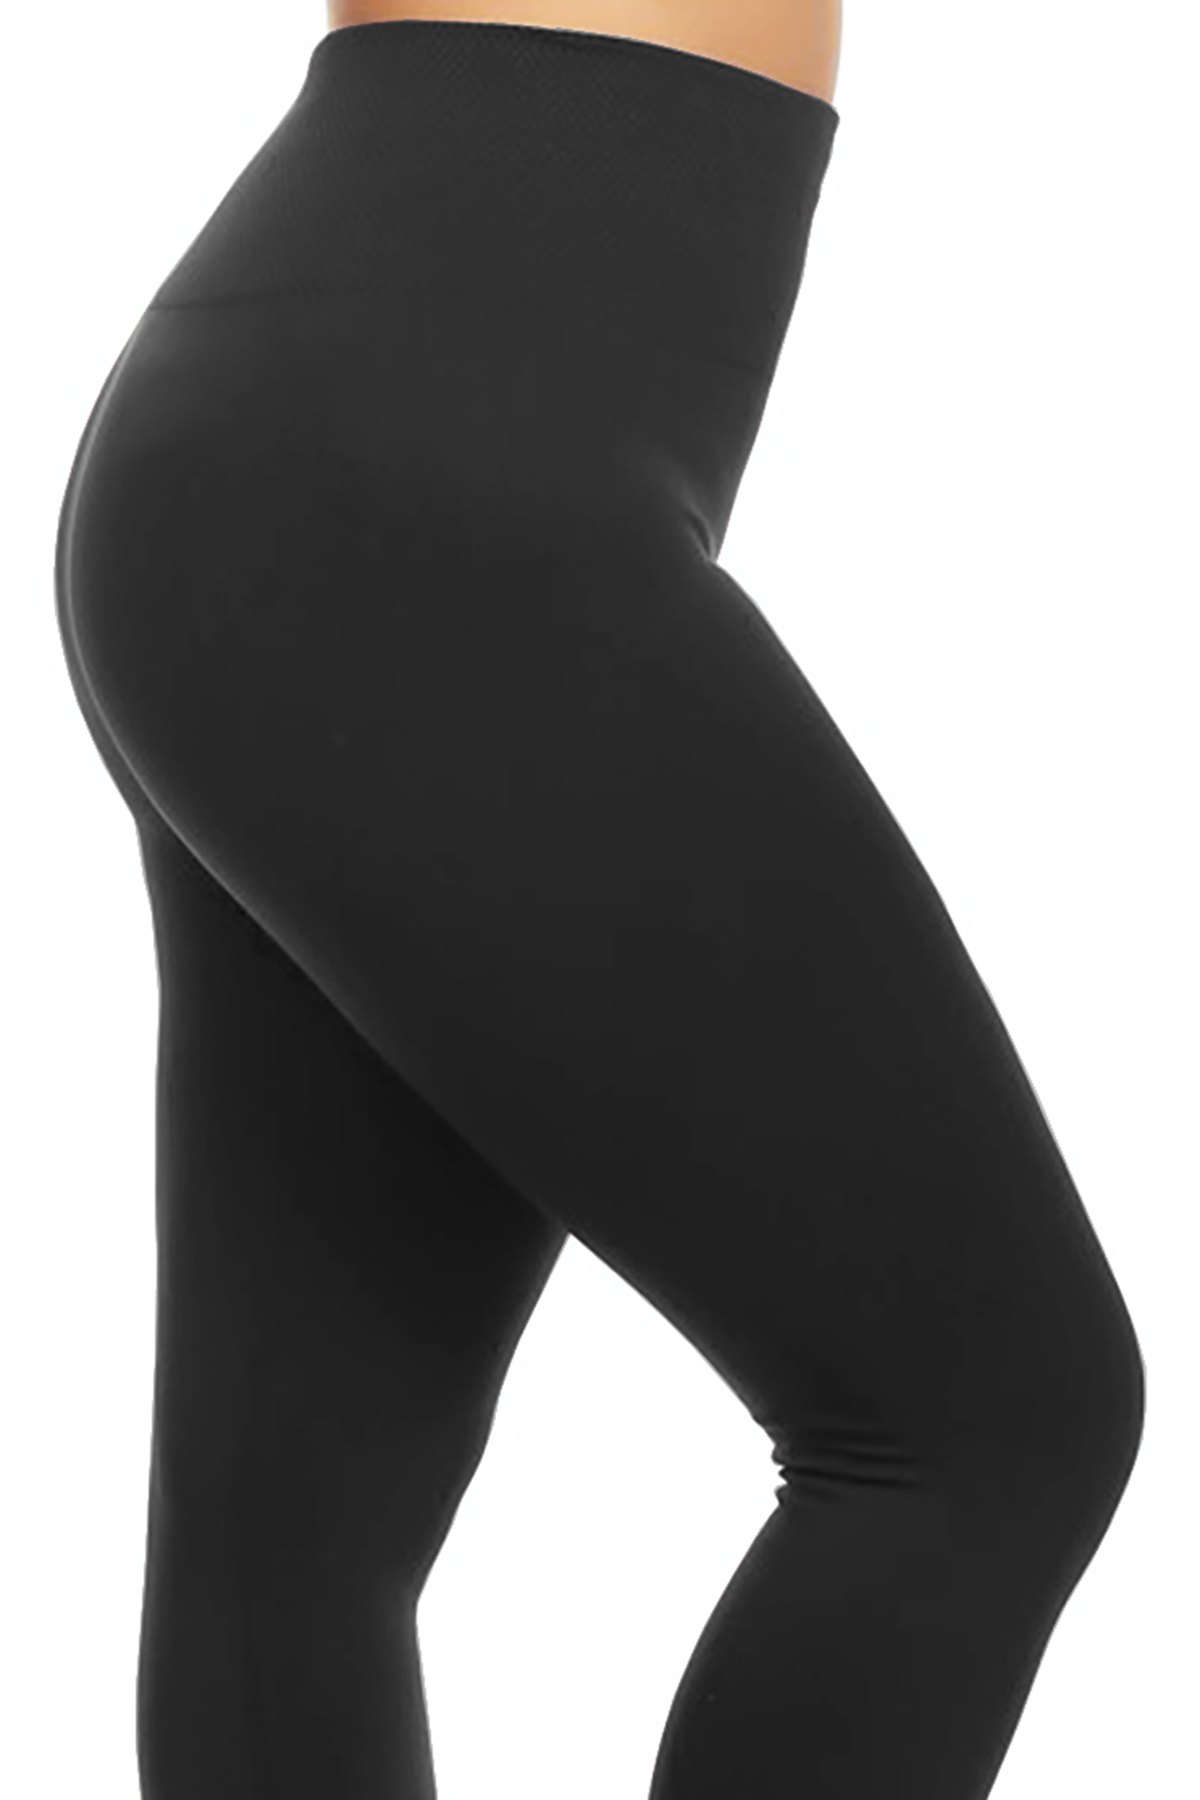 Moa Collection Women's Plus Size Solid High Rise Banded Waist Full length Leggings with Fleece Lining